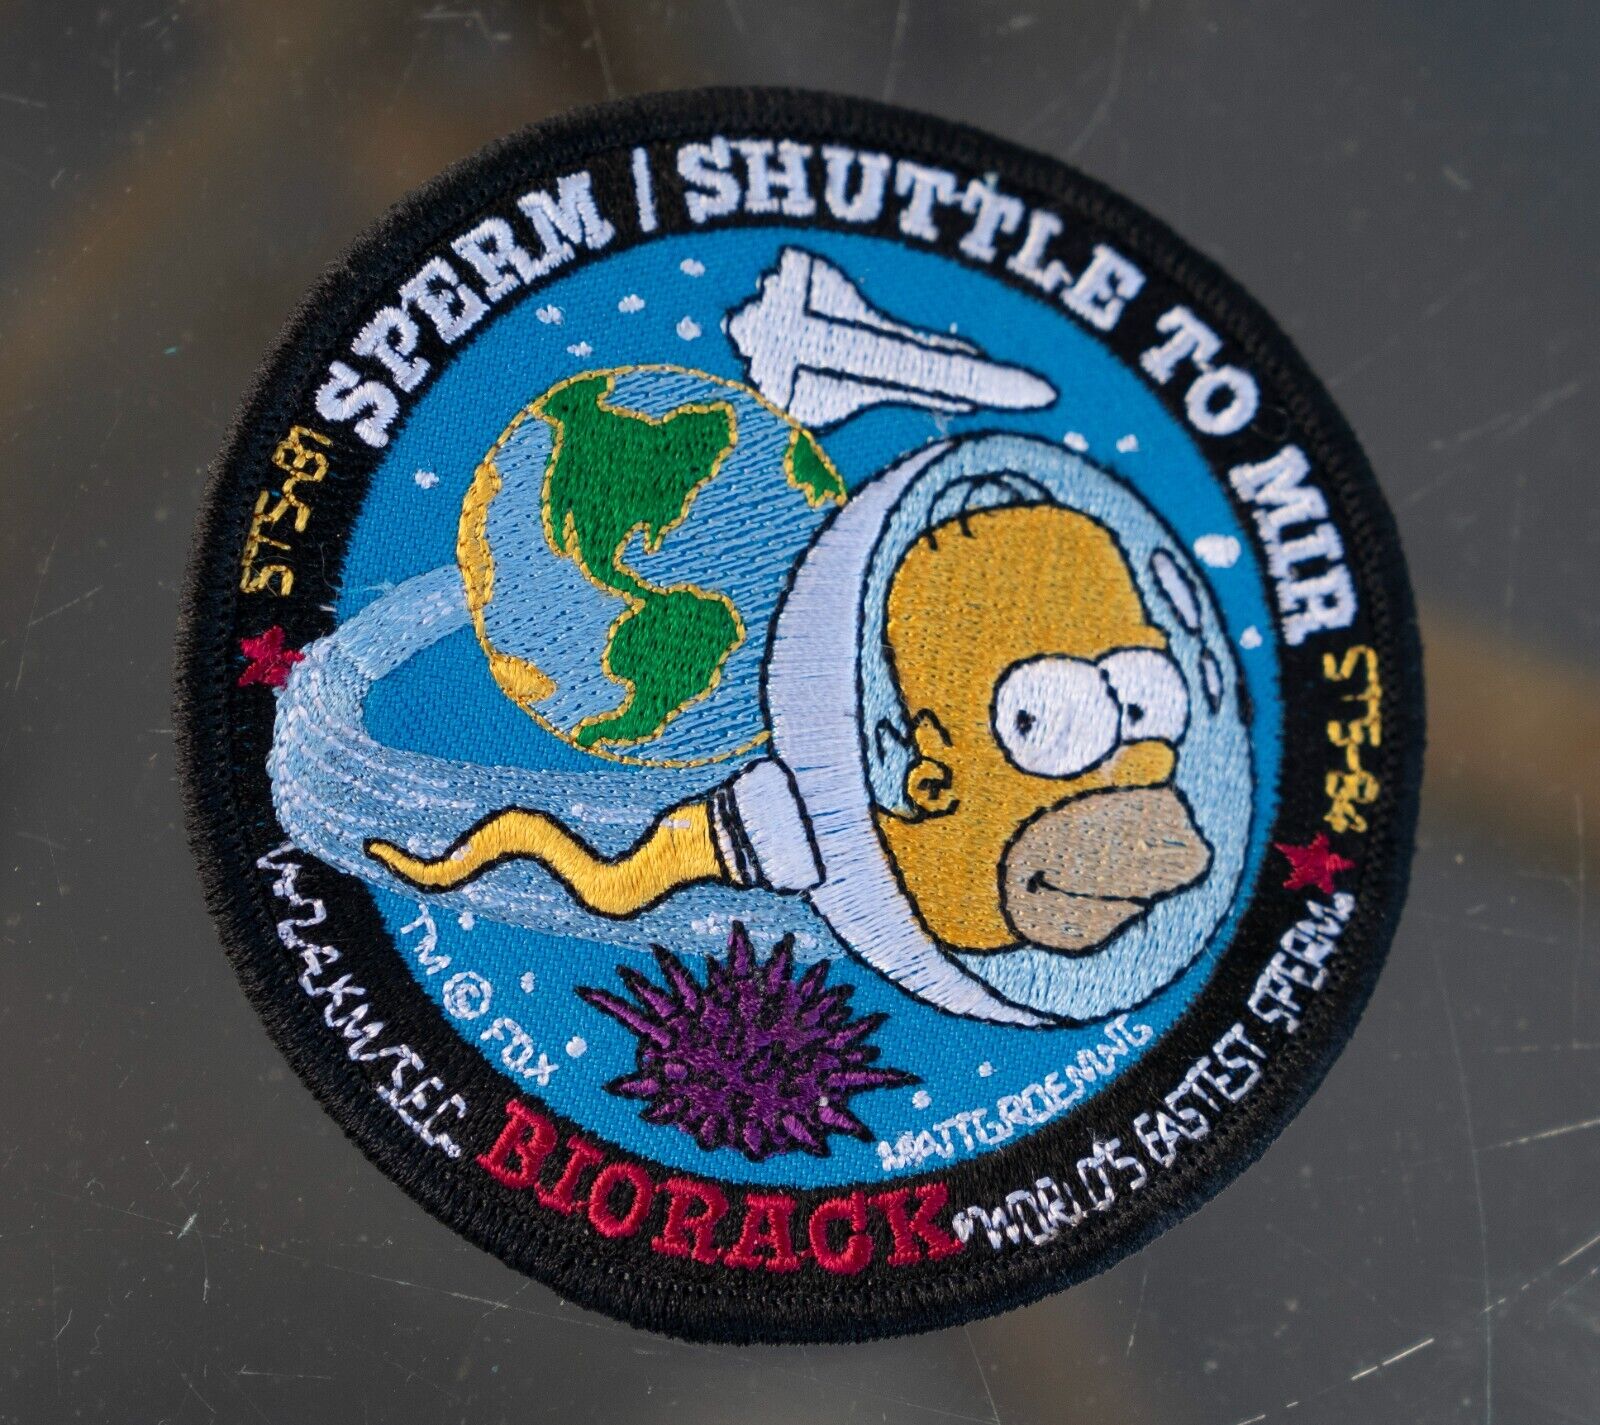 RARE STS-81/STS-84 Sperm/(Space) Shuttle to Mir Homer Simpson BIORACK Patch NASA